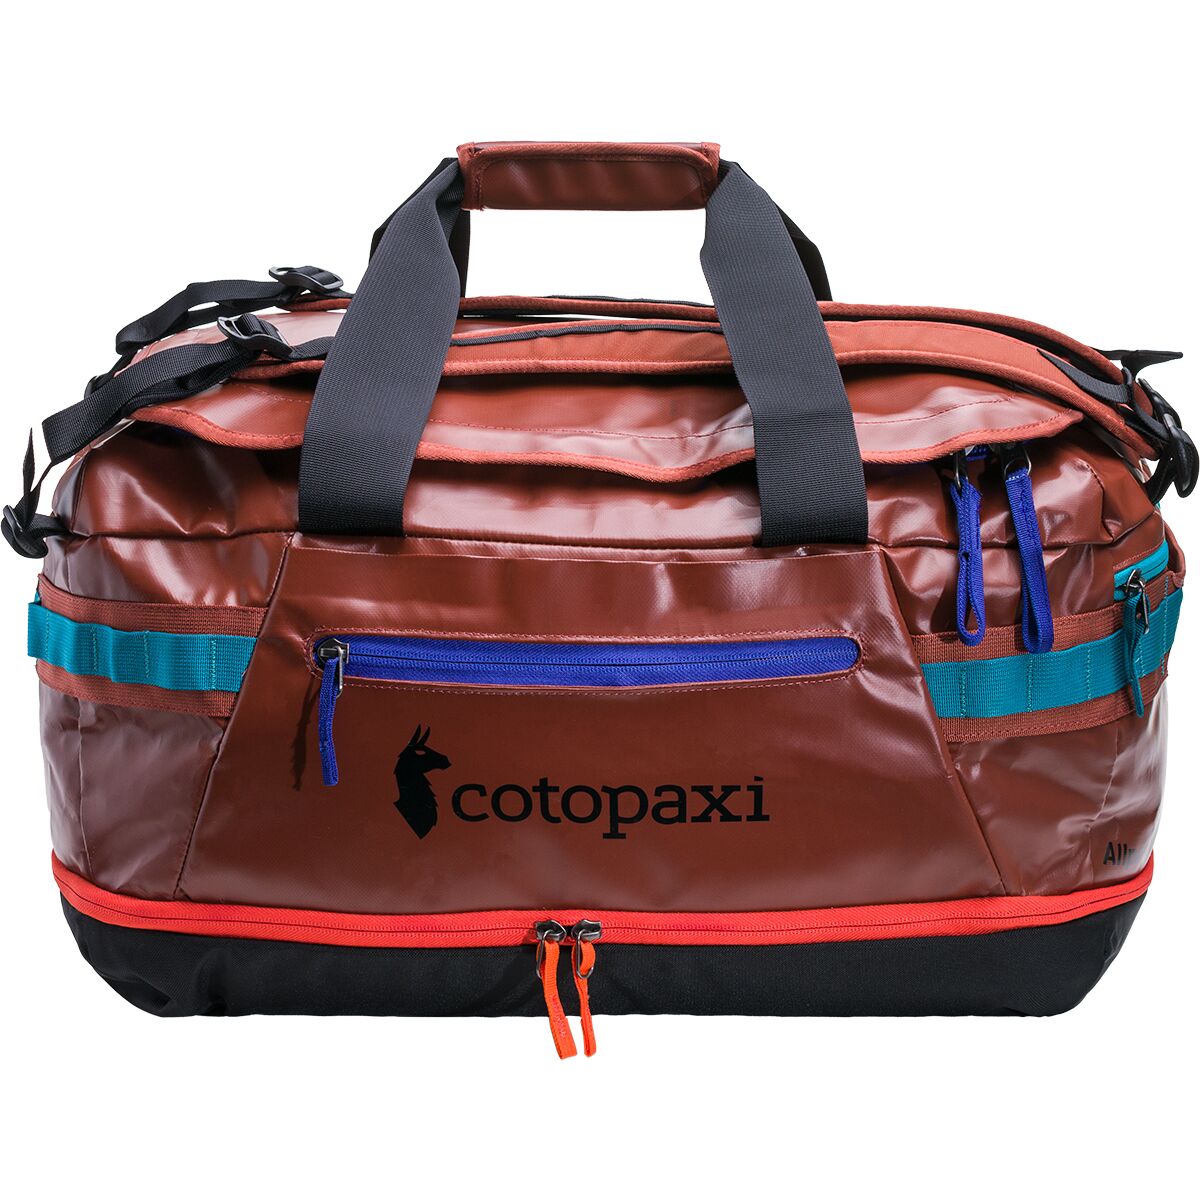 Cotopaxi Bags and luggage